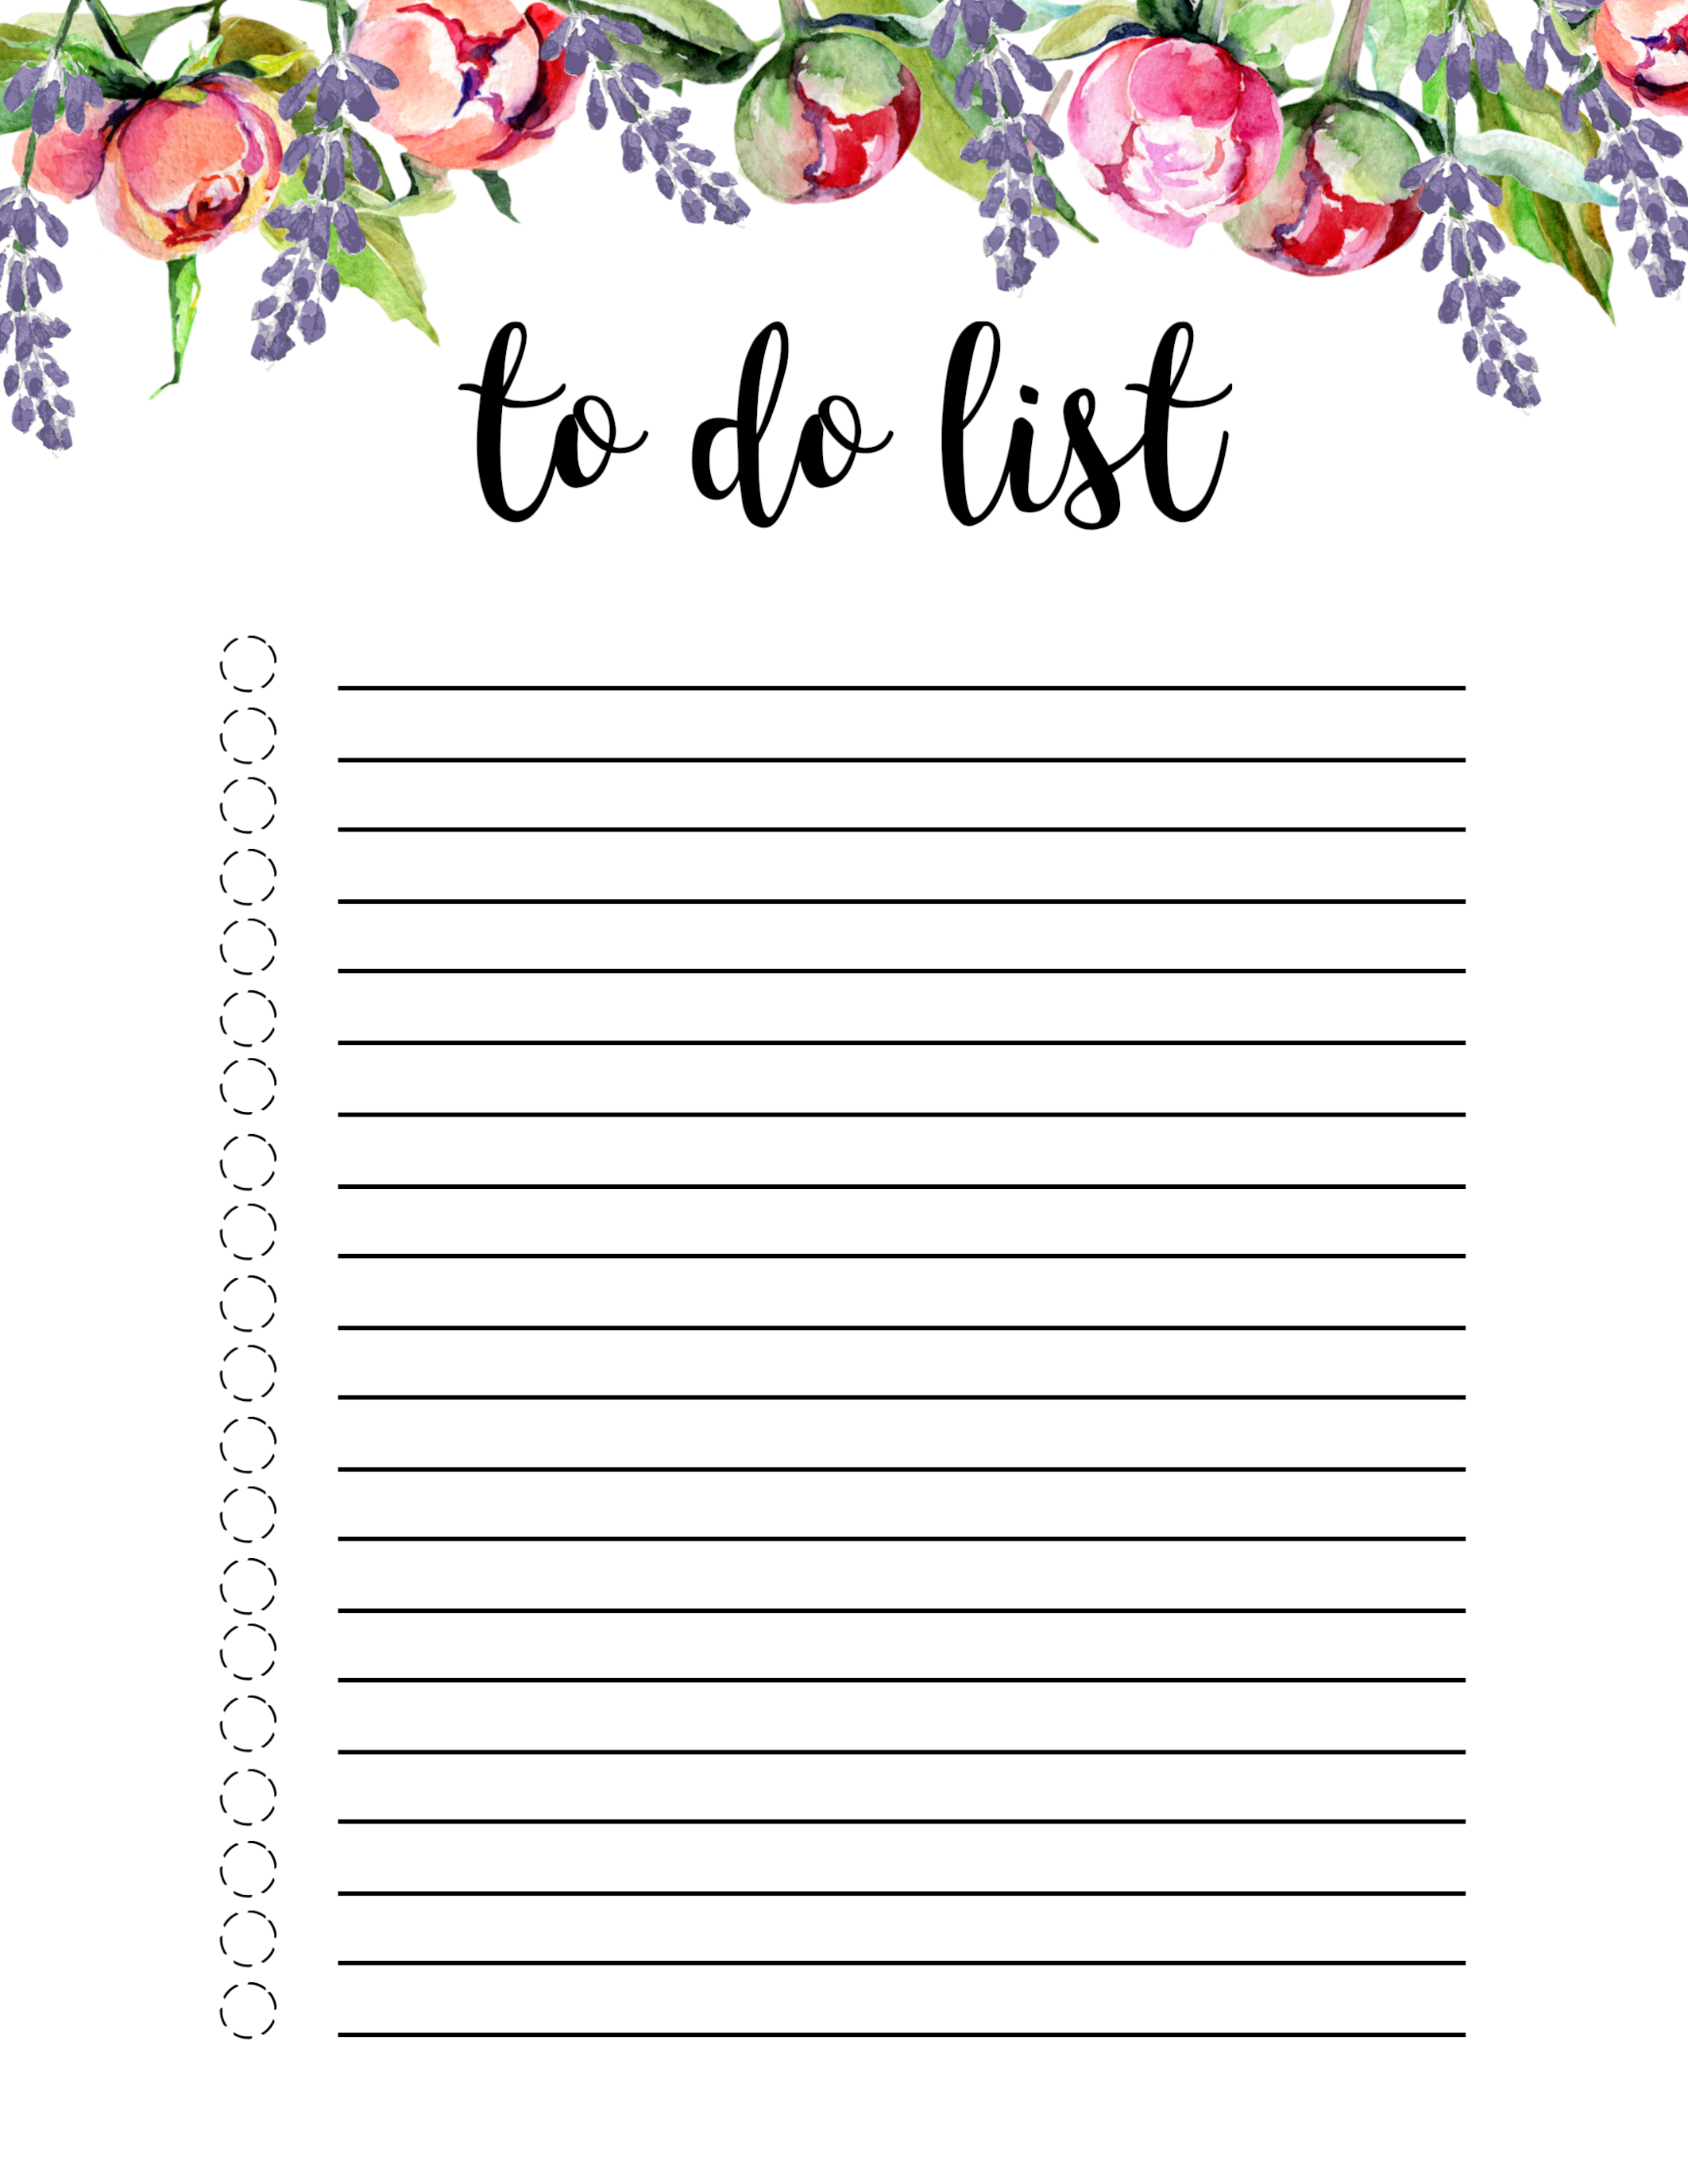 Floral To Do List Printable Template - Paper Trail Design